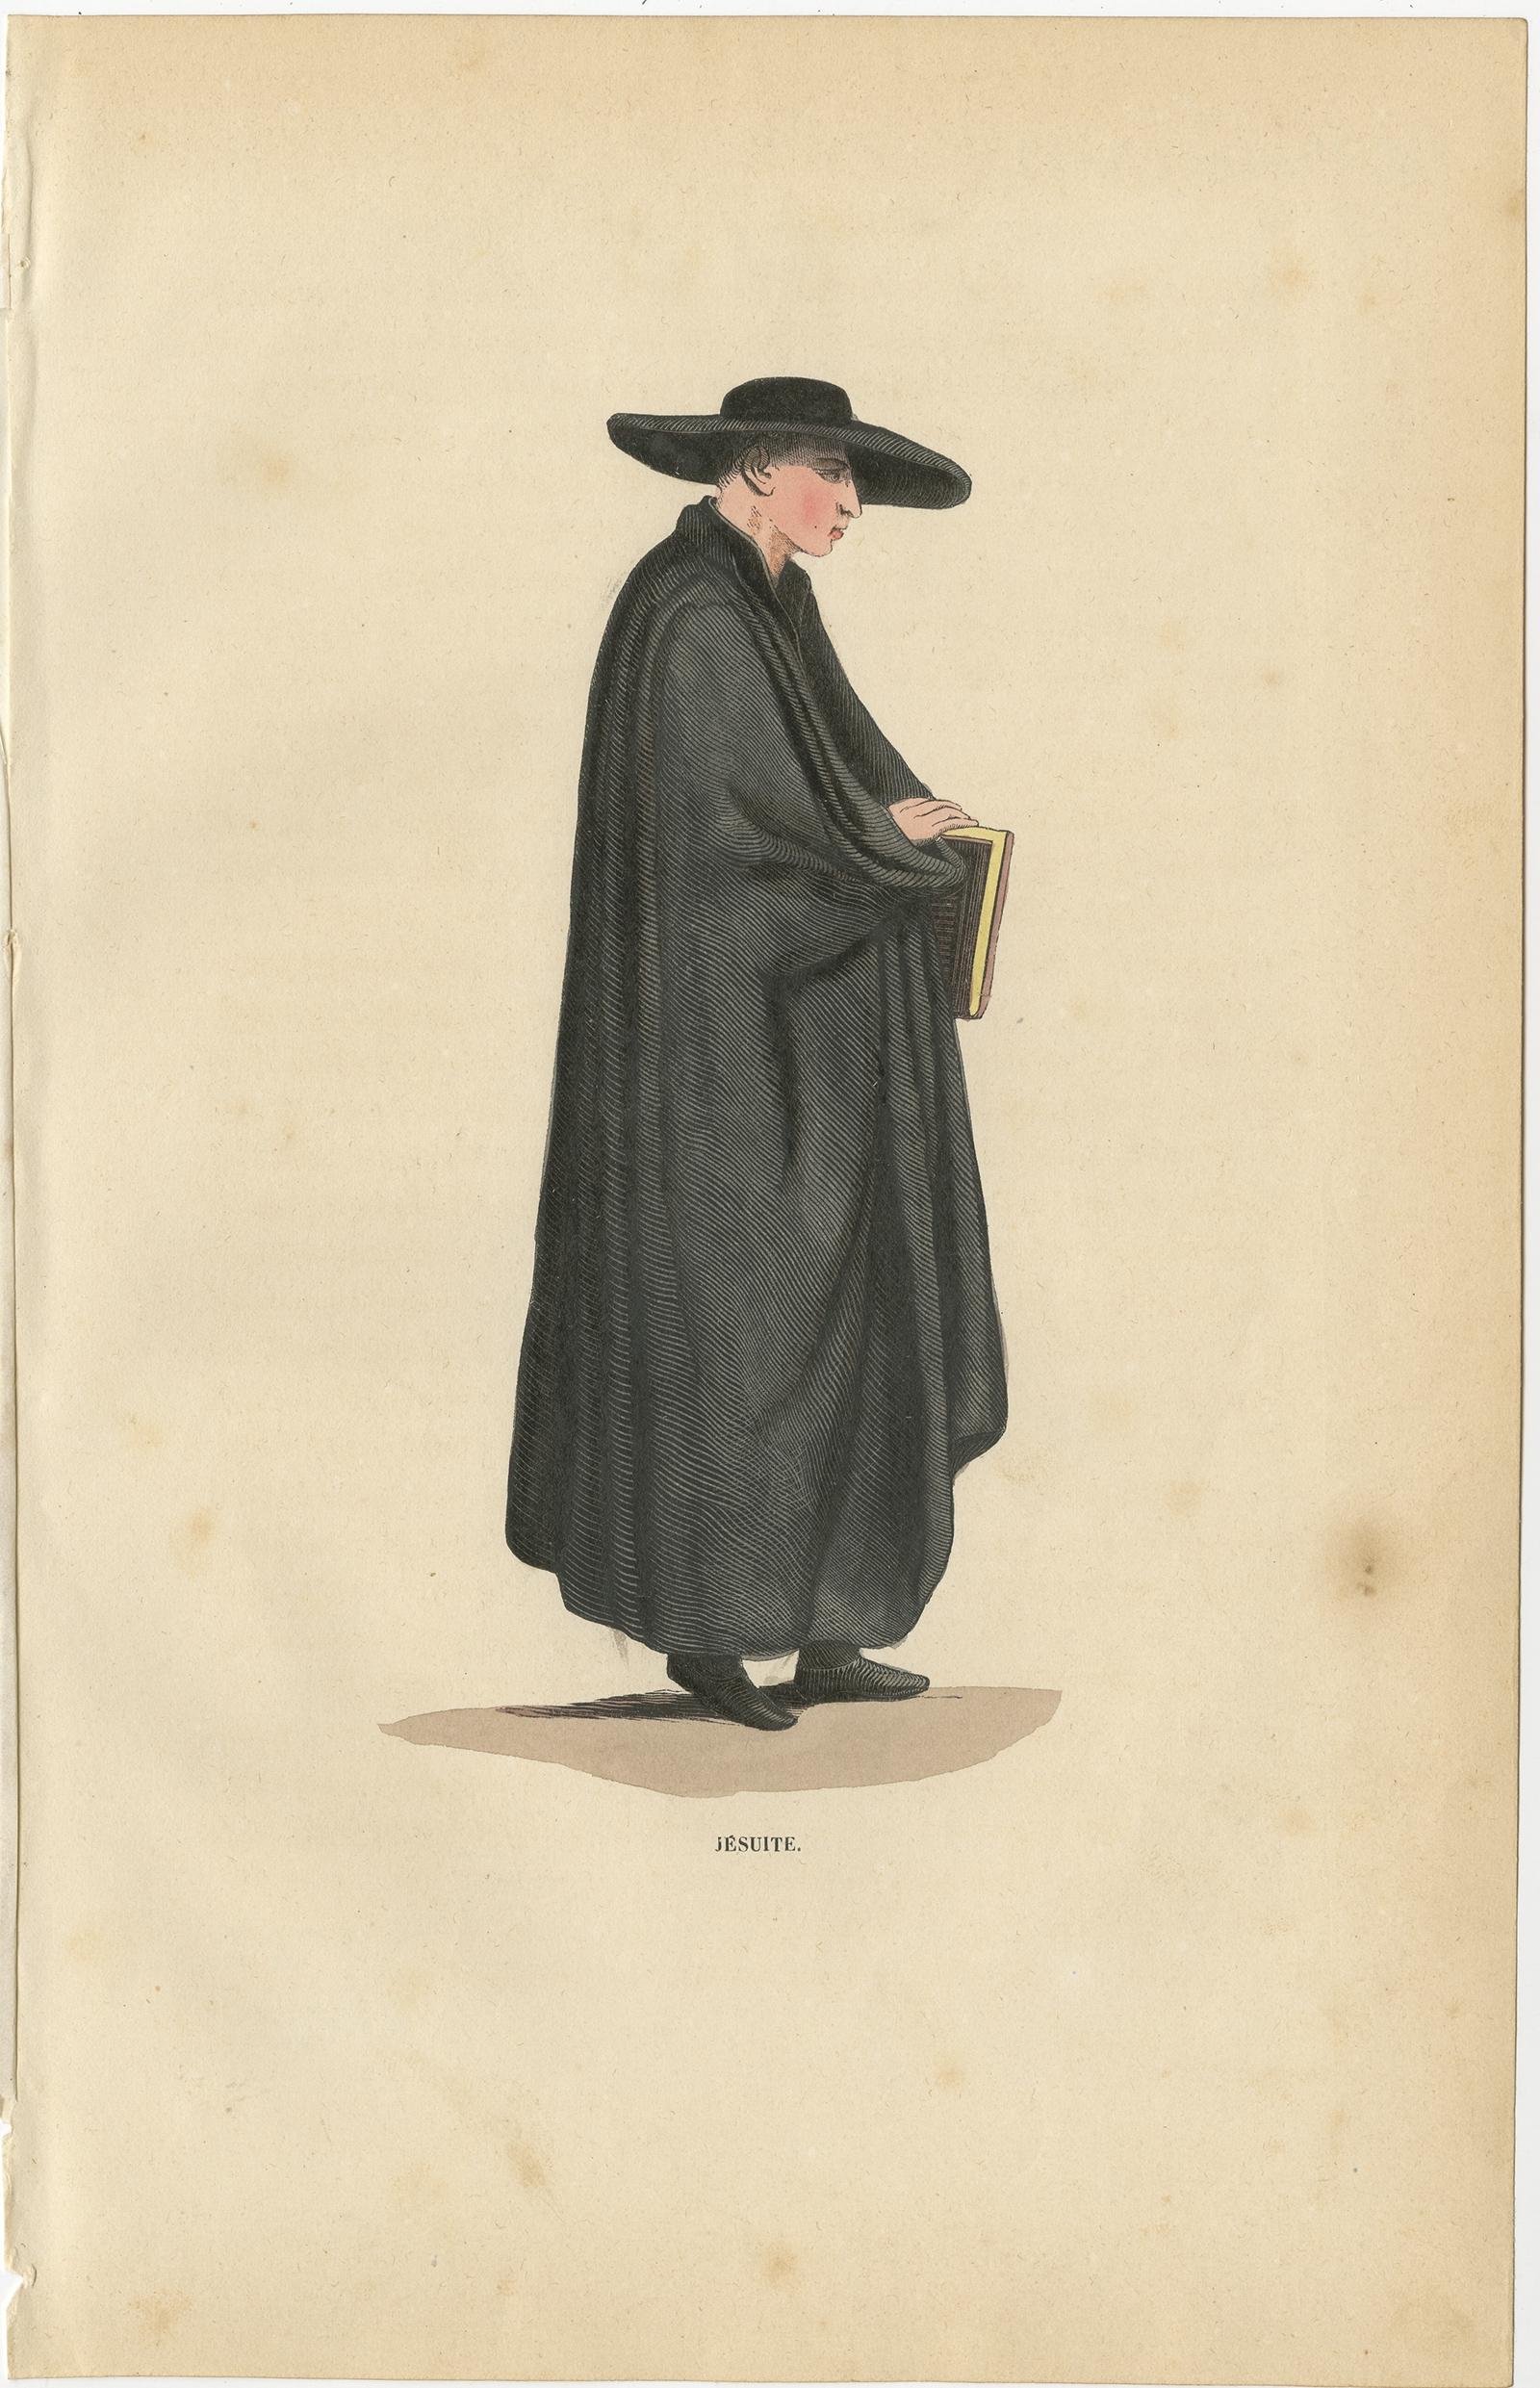 Antique print titled 'Jesuite'. 

Print of a Jesuit. This print originates from 'Histoire et Costumes des Ordres Religieux'.

Artists and Engravers: Author: Abbé Tiron. 

Condition: Good, general age-related toning. Minor wear and foxing,